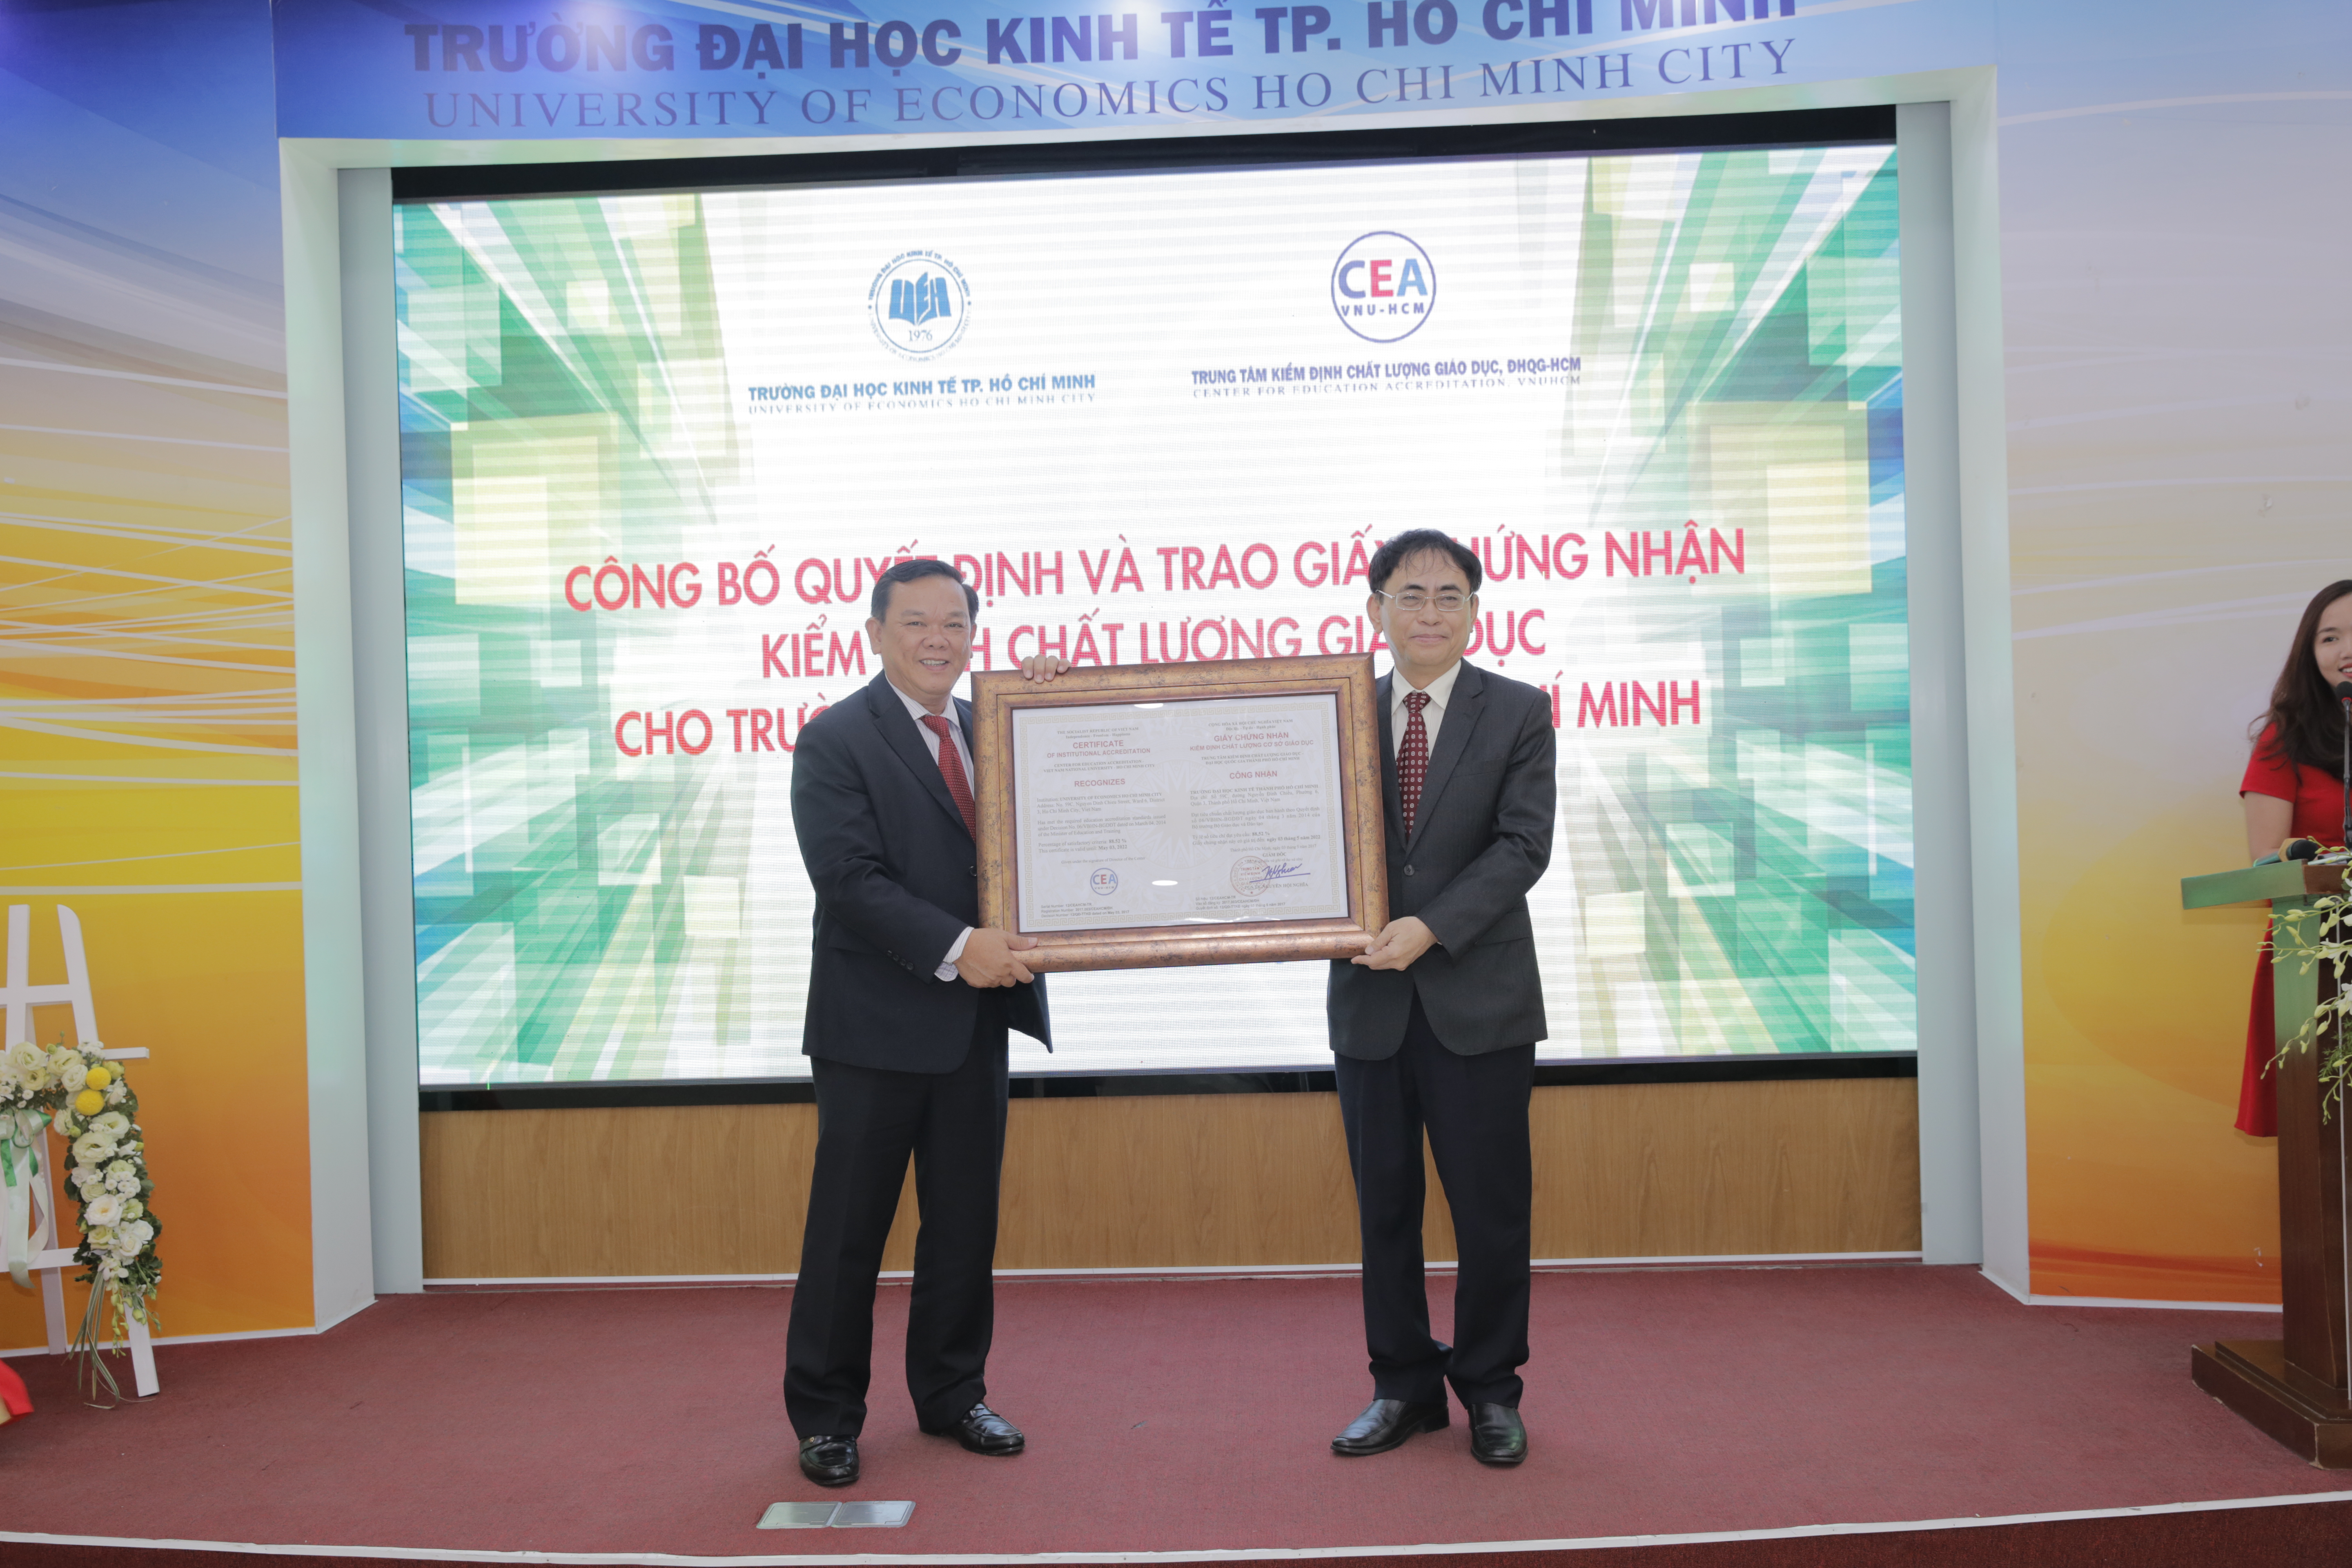 UEH held an event to announce the result of the quality accreditation of the University of Economics HCMC in the 2nd period of 2010-2016